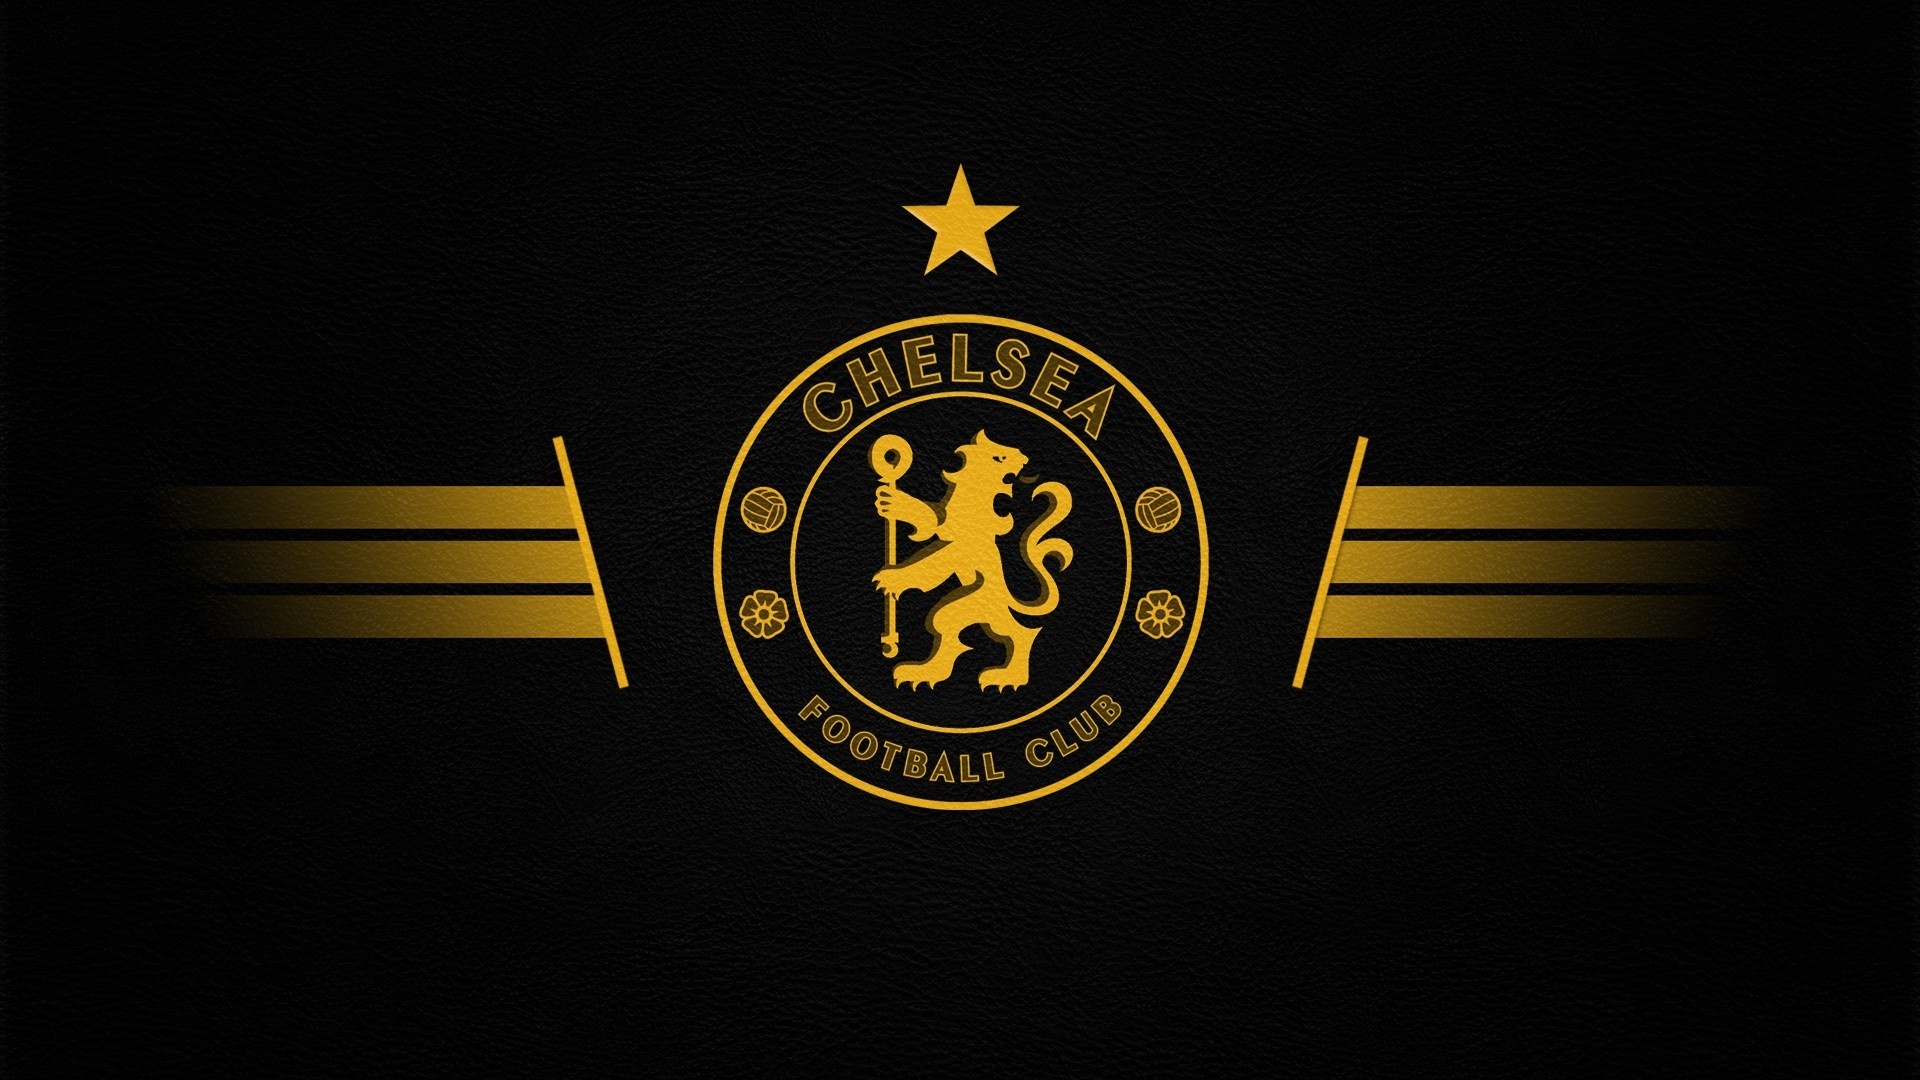 Chelsea: The seventh most valuable football club in the world (as of 2021). 1920x1080 Full HD Wallpaper.